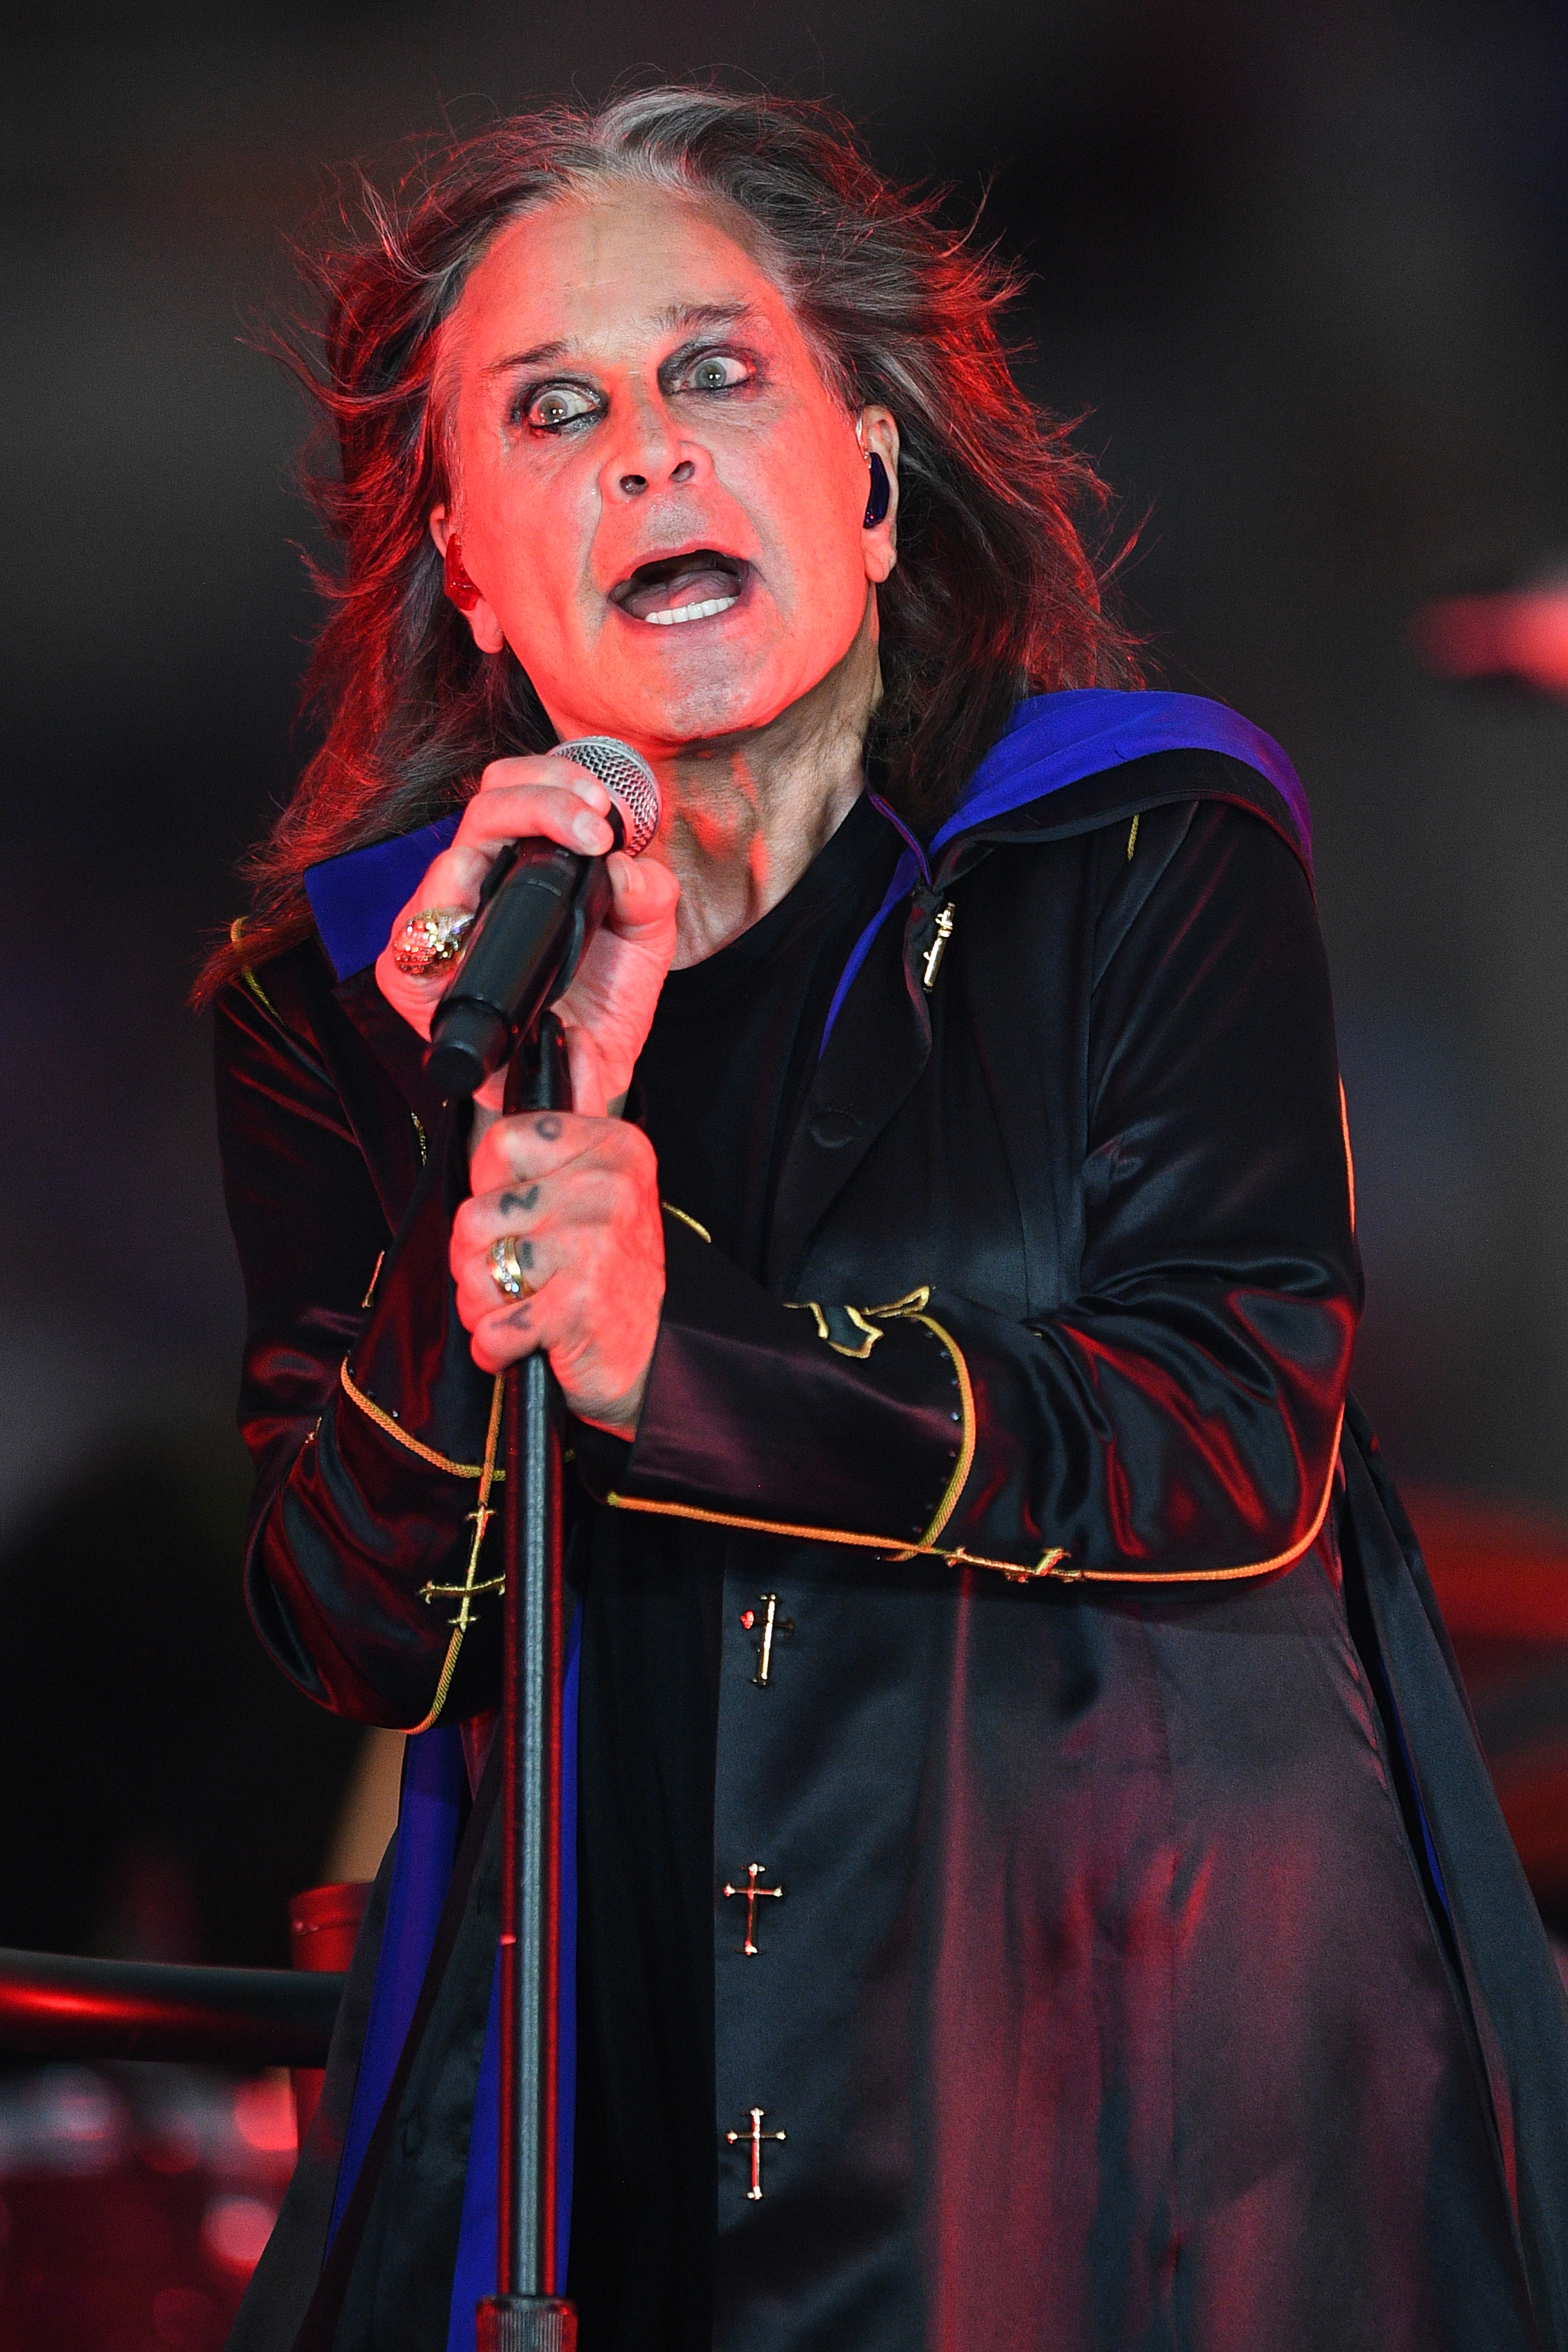 Ozzy Osbourne performs at halftime during the NFL game between the Buffalo Bills and the Los Angeles Rams, at SoFi Stadium in Inglewood, California, on September 8, 2022. | Source: Getty Images